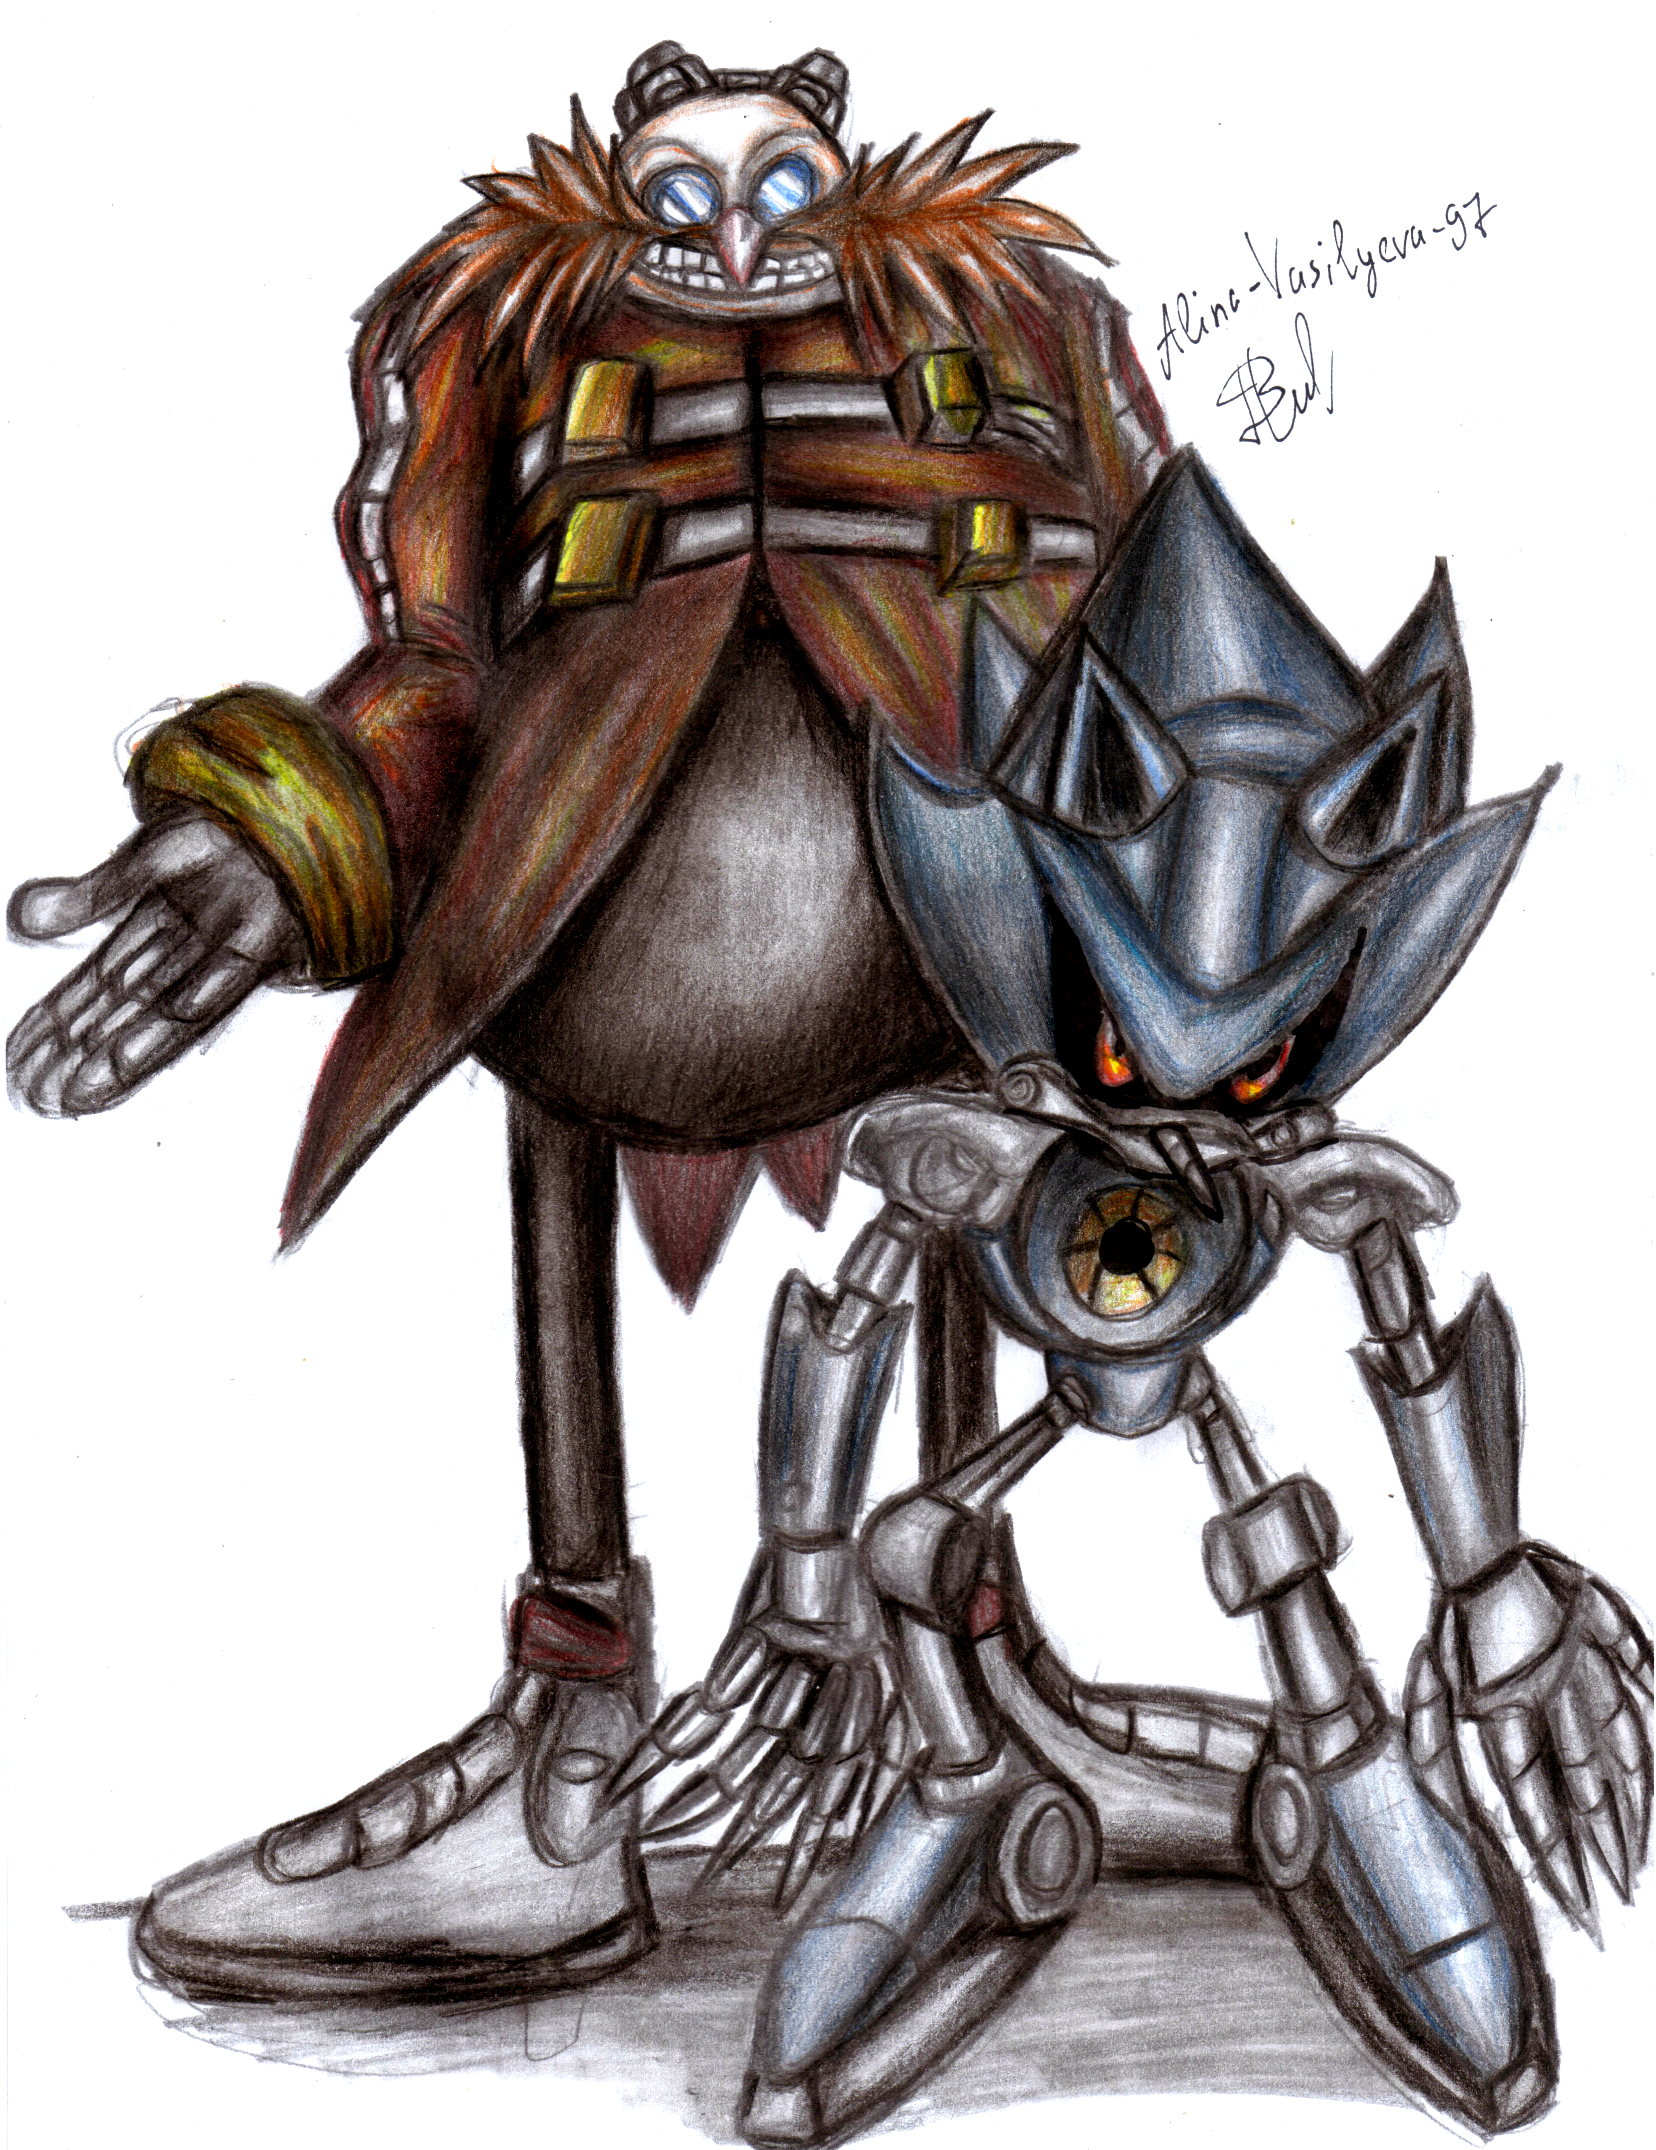 sonic the hedgehog, dr. eggman, metal sonic, and neo metal sonic (sonic)  drawn by 9474s0ul